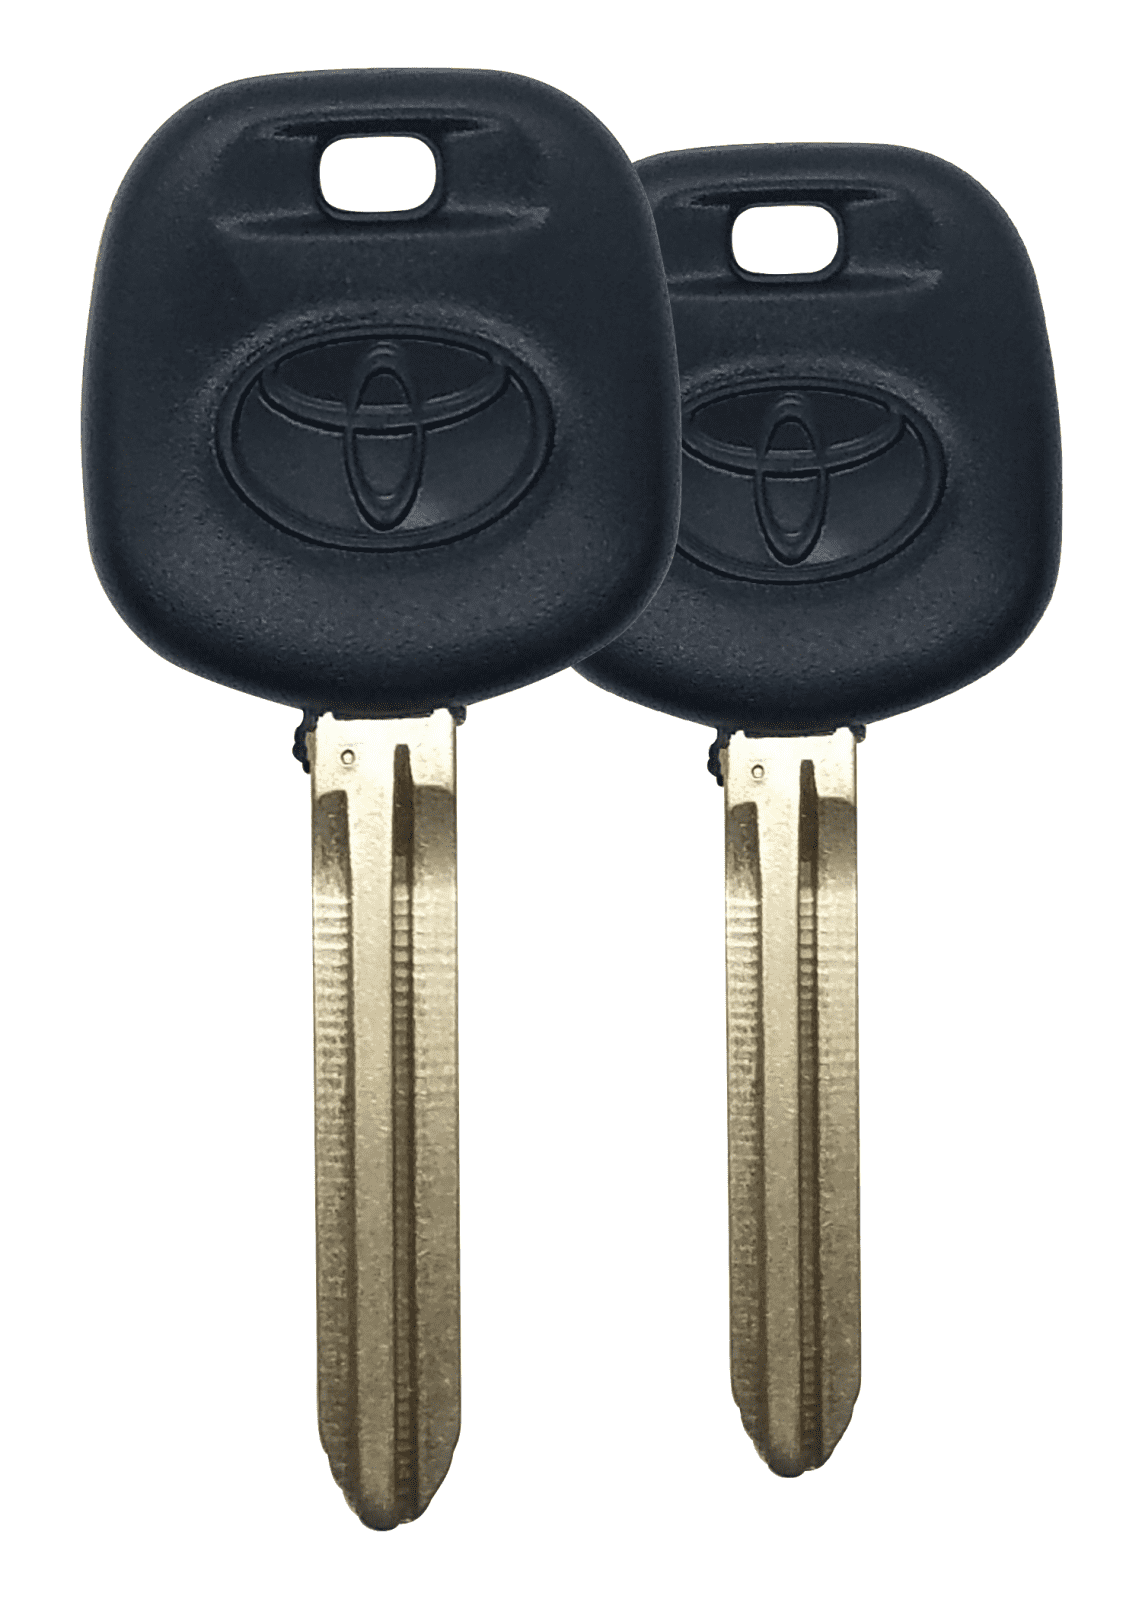 Pair Transponder Chip Ignition Car Key Replacement Blank for Chrysler Dodge Jeep 